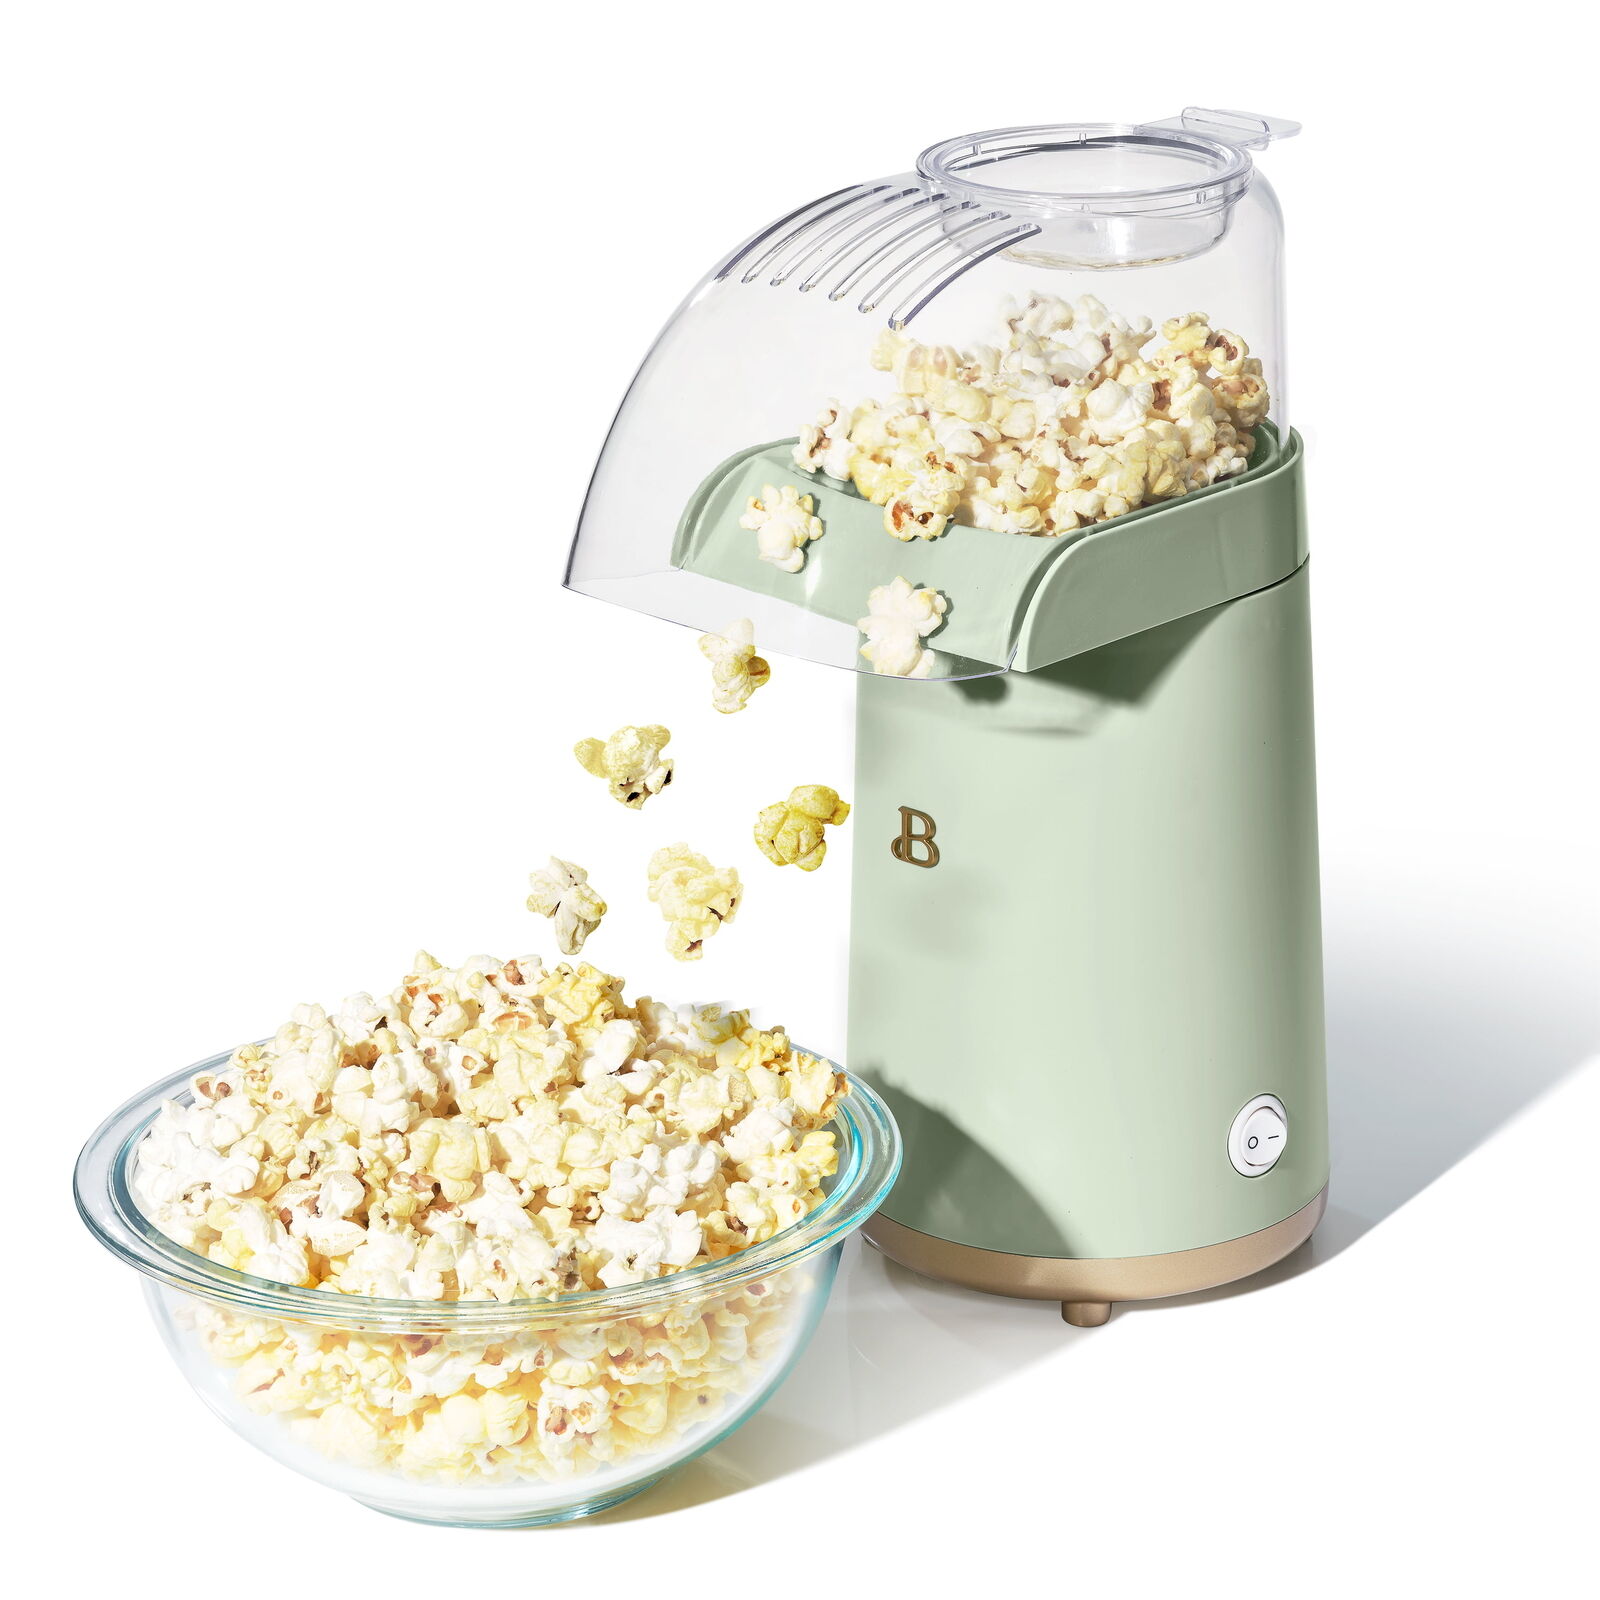 16 Cup Hot Air Electric Popcorn Maker, Sage Green by Drew Barrymore new